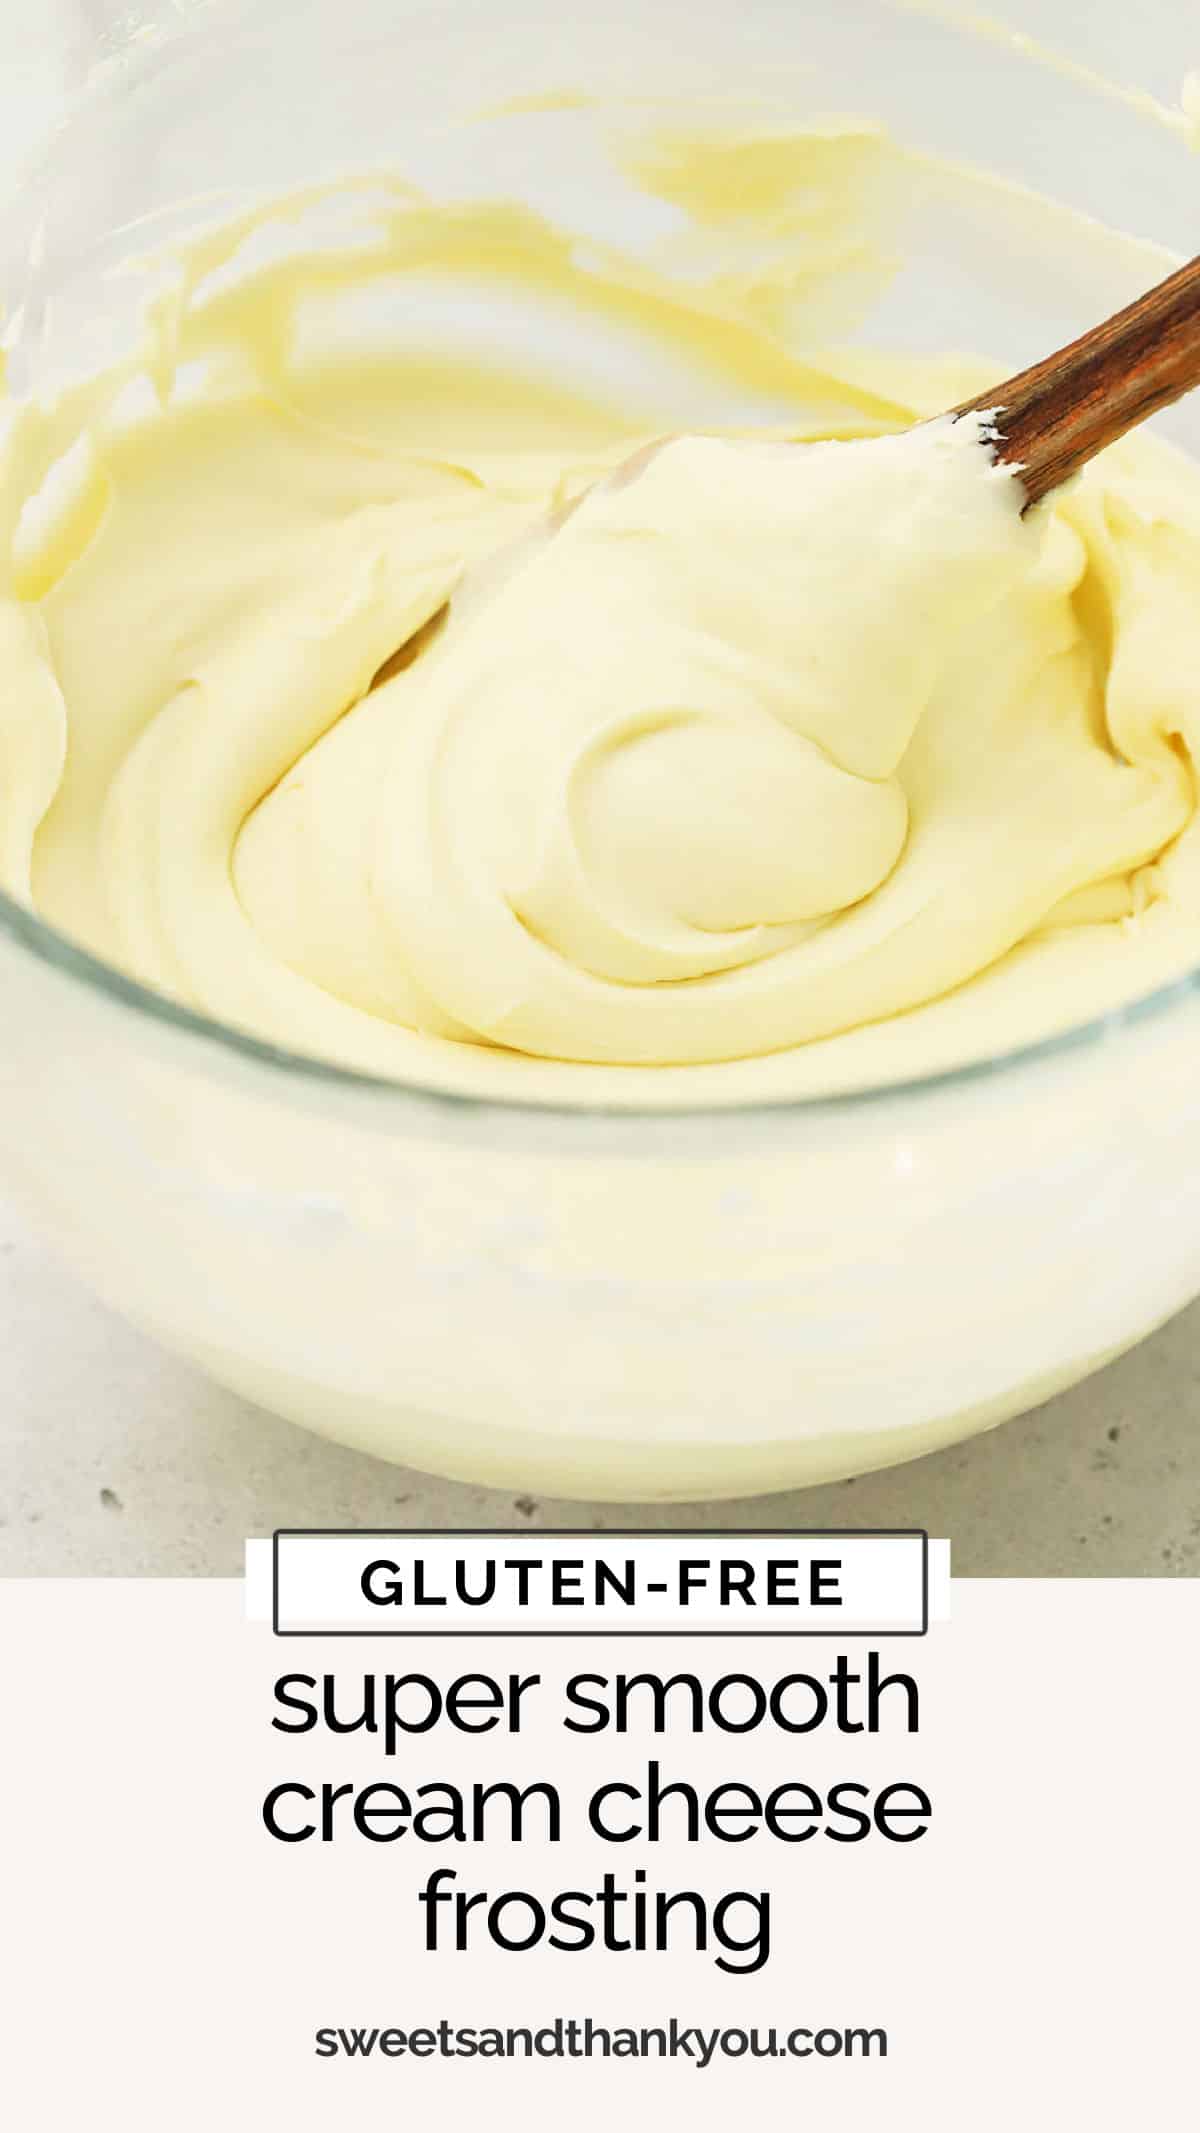 Our homemade cream cheese frosting recipe is naturally gluten-free, made from simple, delicious ingredients that taste delicious every time. It's the perfect pipeable cream cheese frosting for carrot cake, red velvet cake, pumpkin bars, cupcakes, and so much more. Get our tips for fluffy, smooth cream cheese frosting you can actually pipe, plus 10+ ways to use it in this post!